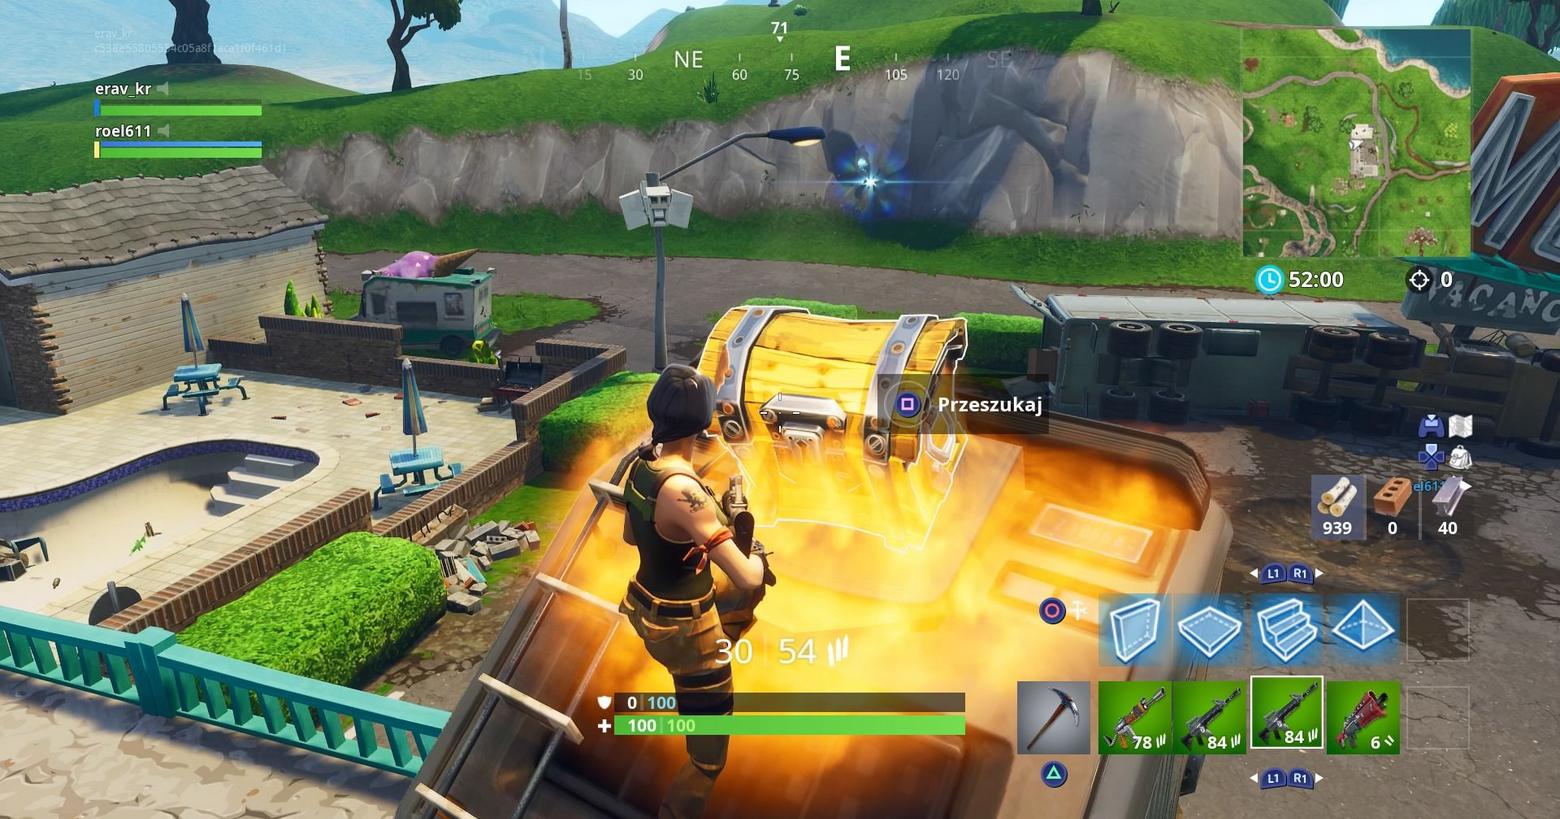 With Fortnite tips, you will learn how to behave correctly after the jump. In this screenshot, we see the player as a female character in the third person in a long shot with a brown braid, dark brown top, and orange combat pants. She is centered at the bottom of the screen and is jumping onto a roof, where she opens a golden chest with excellent loot, which is located in the center of the screen. The player is playing a map during the day and around him, there are urban structures like brown and turquoise house facades as well as a rural environment with hills on which green grass grows along with trees. The urban environment is in the image's foreground, whereas the countryside opens up in the background. Learn in a suitable guide, how to get better at Fortnite and use the best settings.